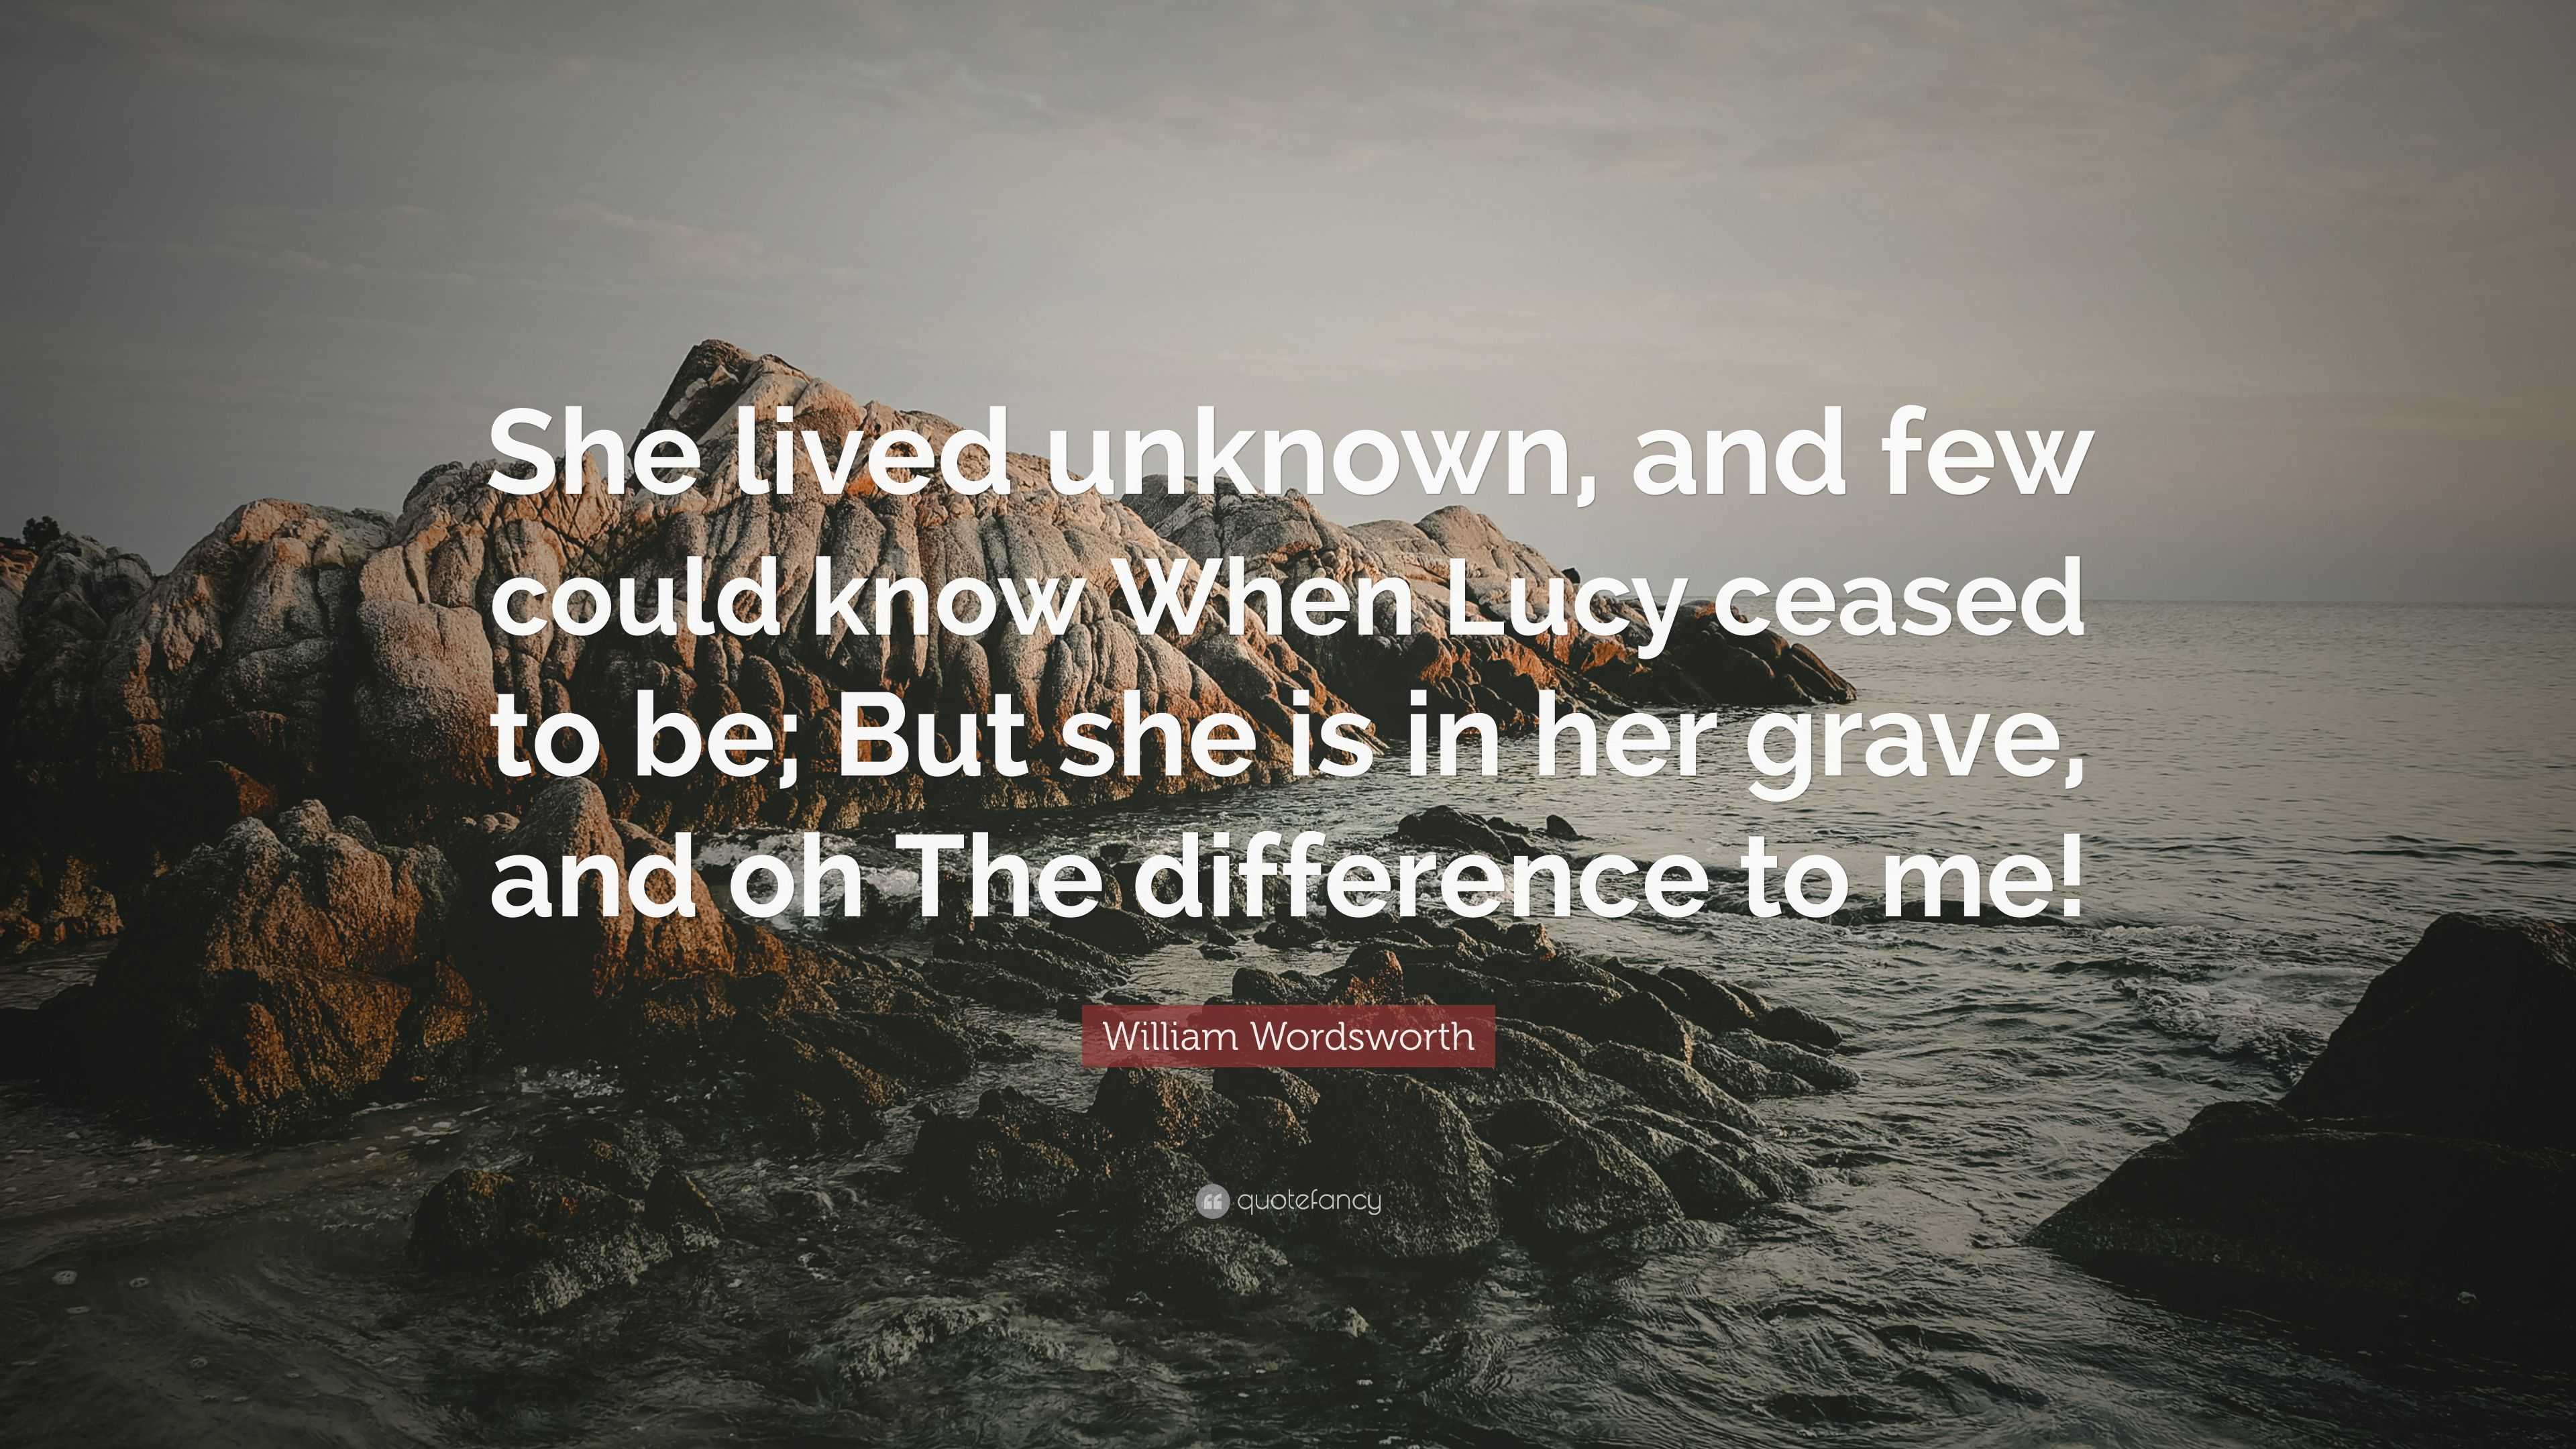 William Wordsworth Quote: “She lived unknown, and few could know When ...